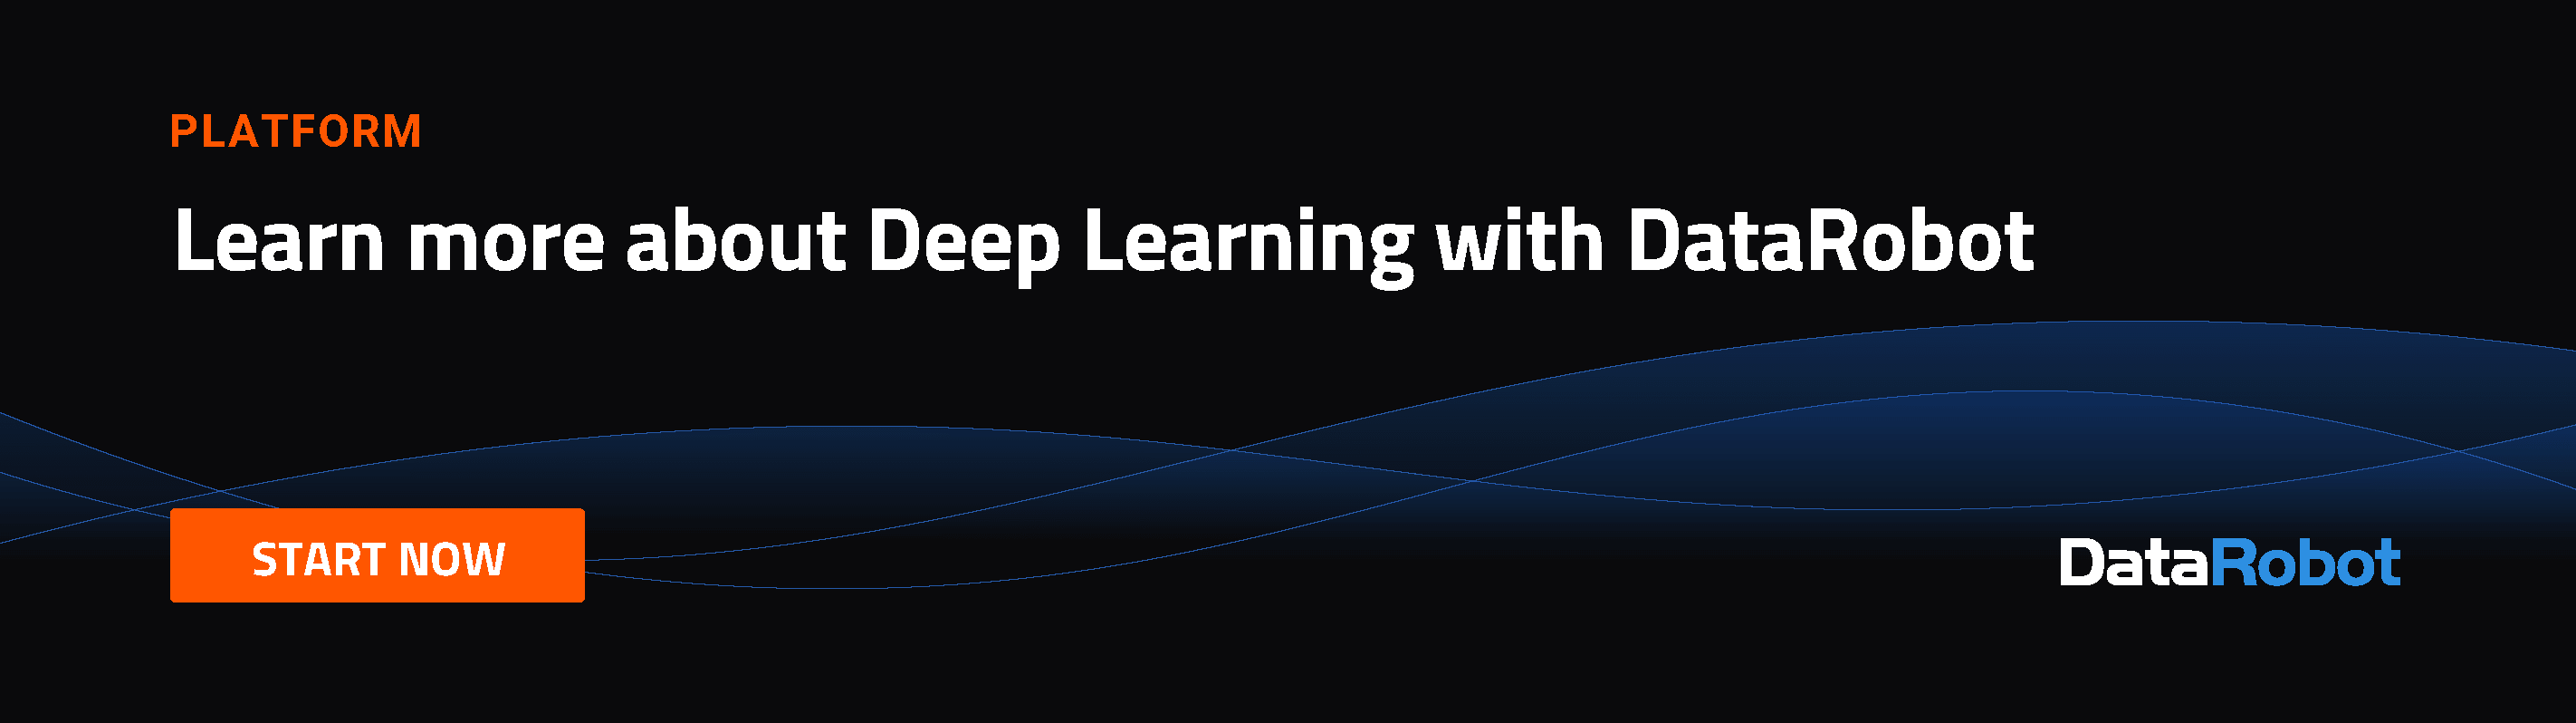 Deep Learning with DataRobot